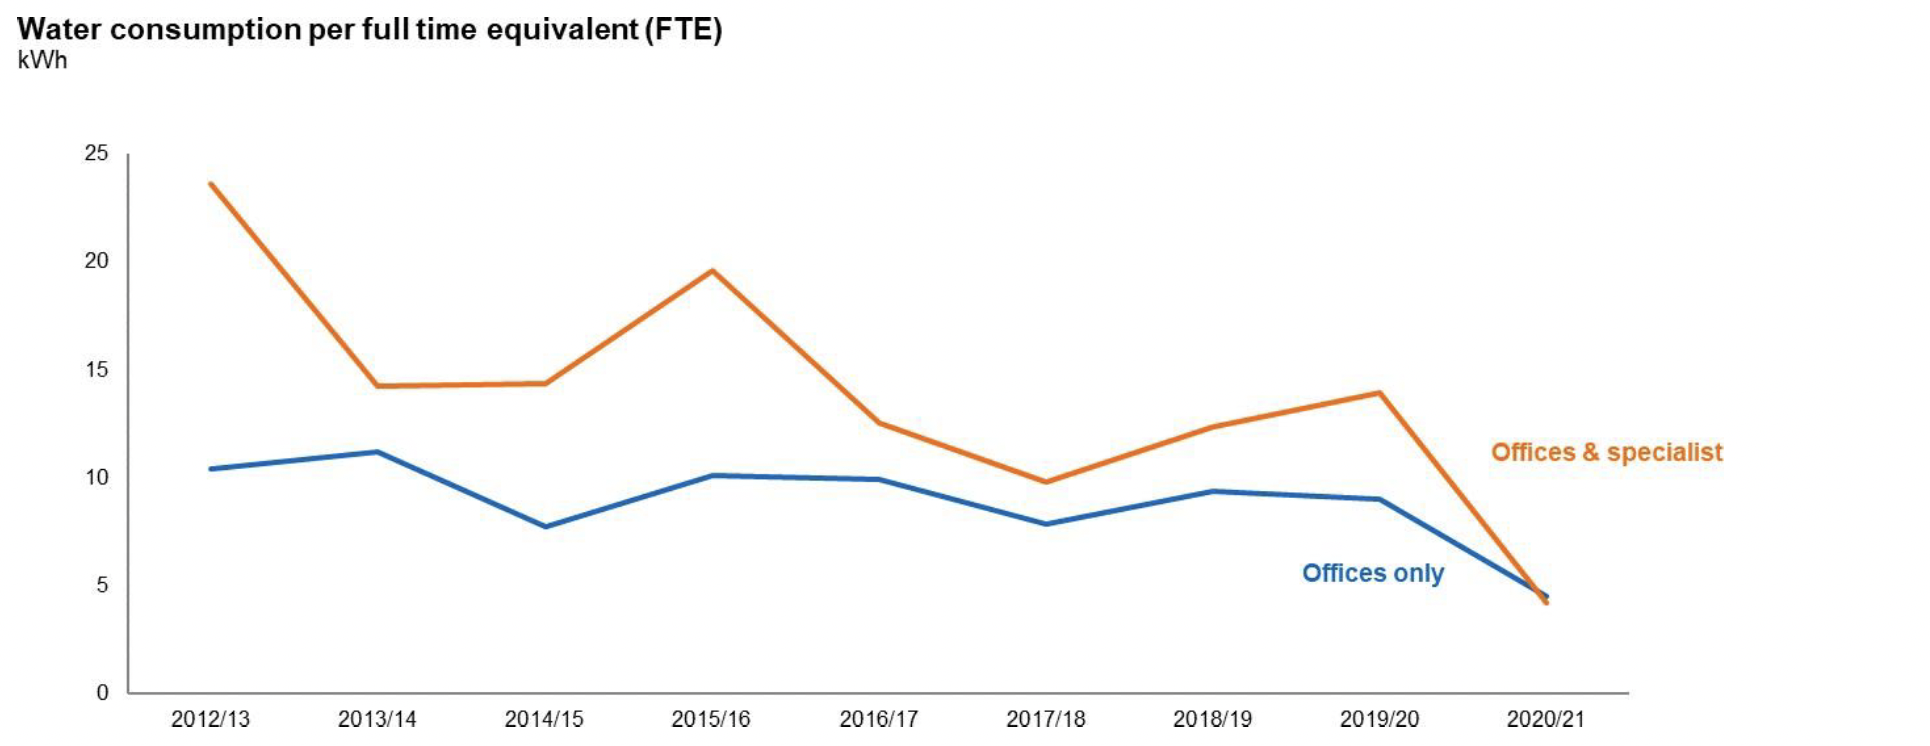 8. A graph showing the annual water consumption per full time equivalent (FTE) from 2012/13 to 2020/21. There are two lines, one line shows the office and specialist building costs which currently sits at 4.2 metres cubed (m3) and the other line which shows offices only at 5 metres cubed (m3).